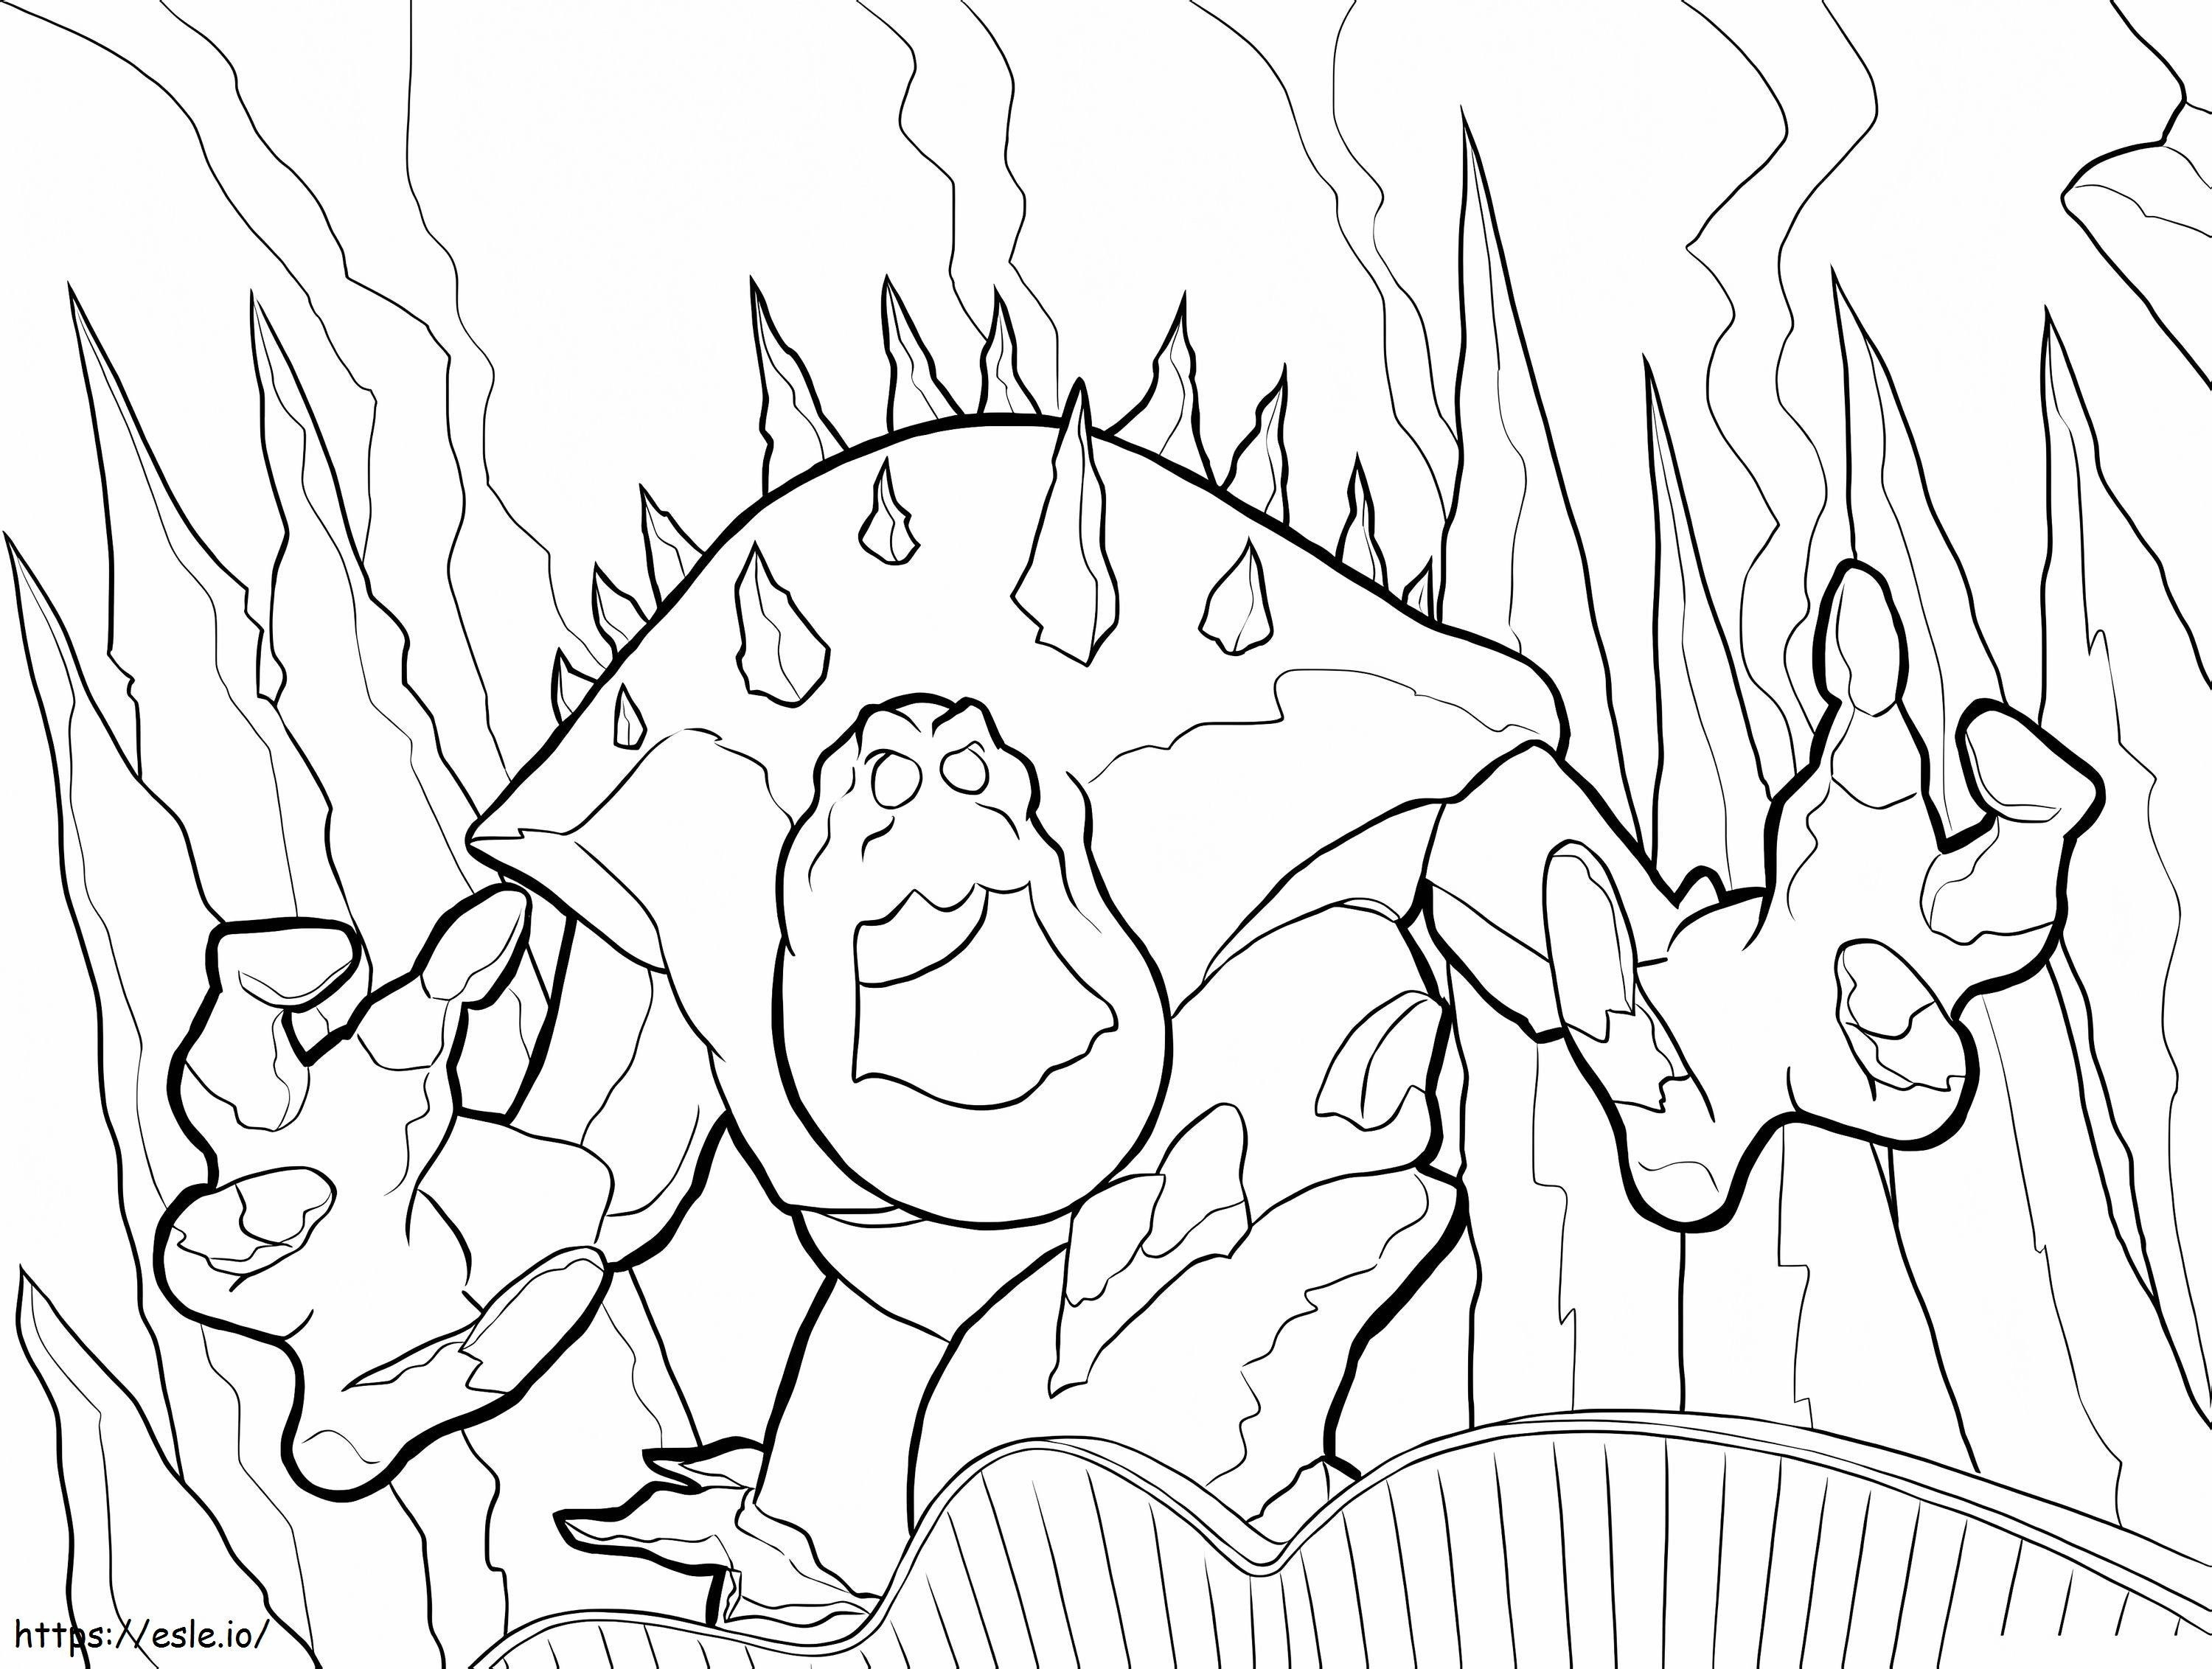 Marshmallow The Angry Giant The Snow Queen coloring page